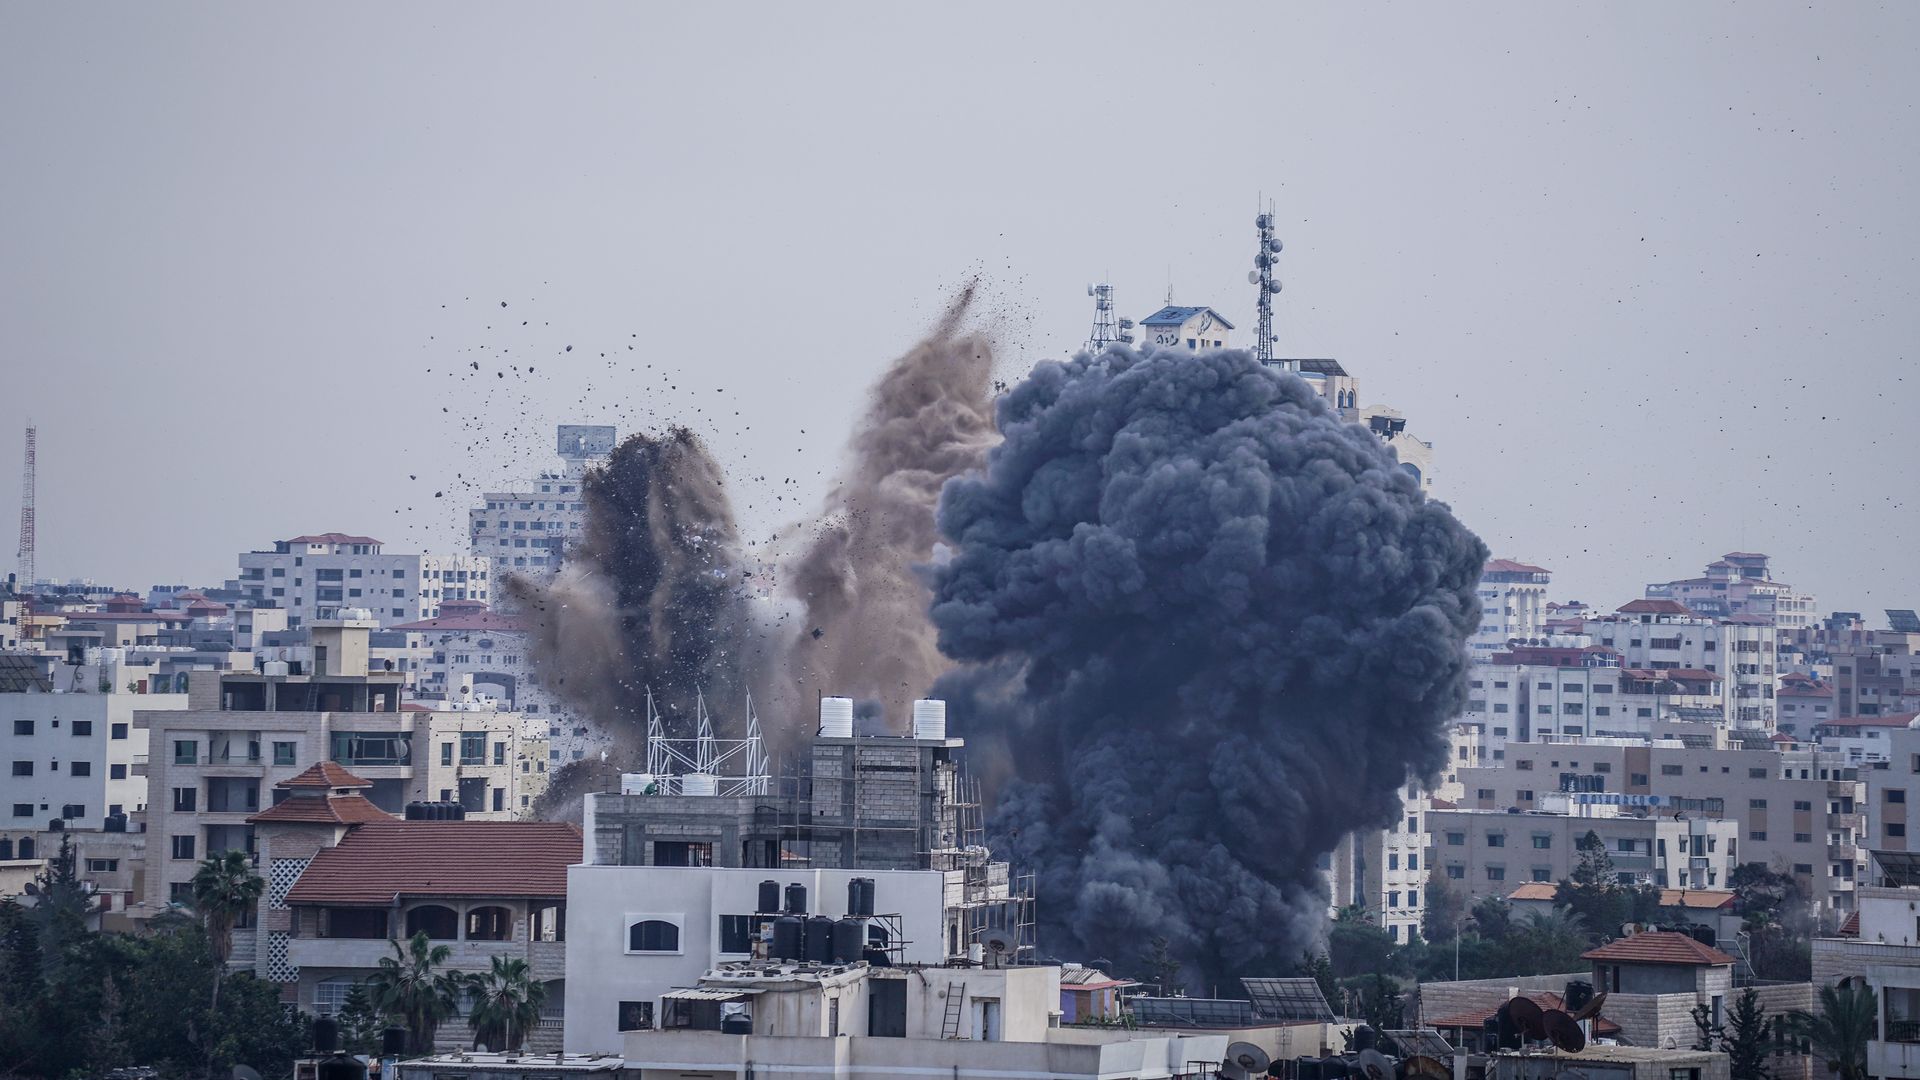  Smoke rises after an Israeli air raid on homes in Gaza City during the conflict between the Palestinians and the Israeli army that began two days ago.